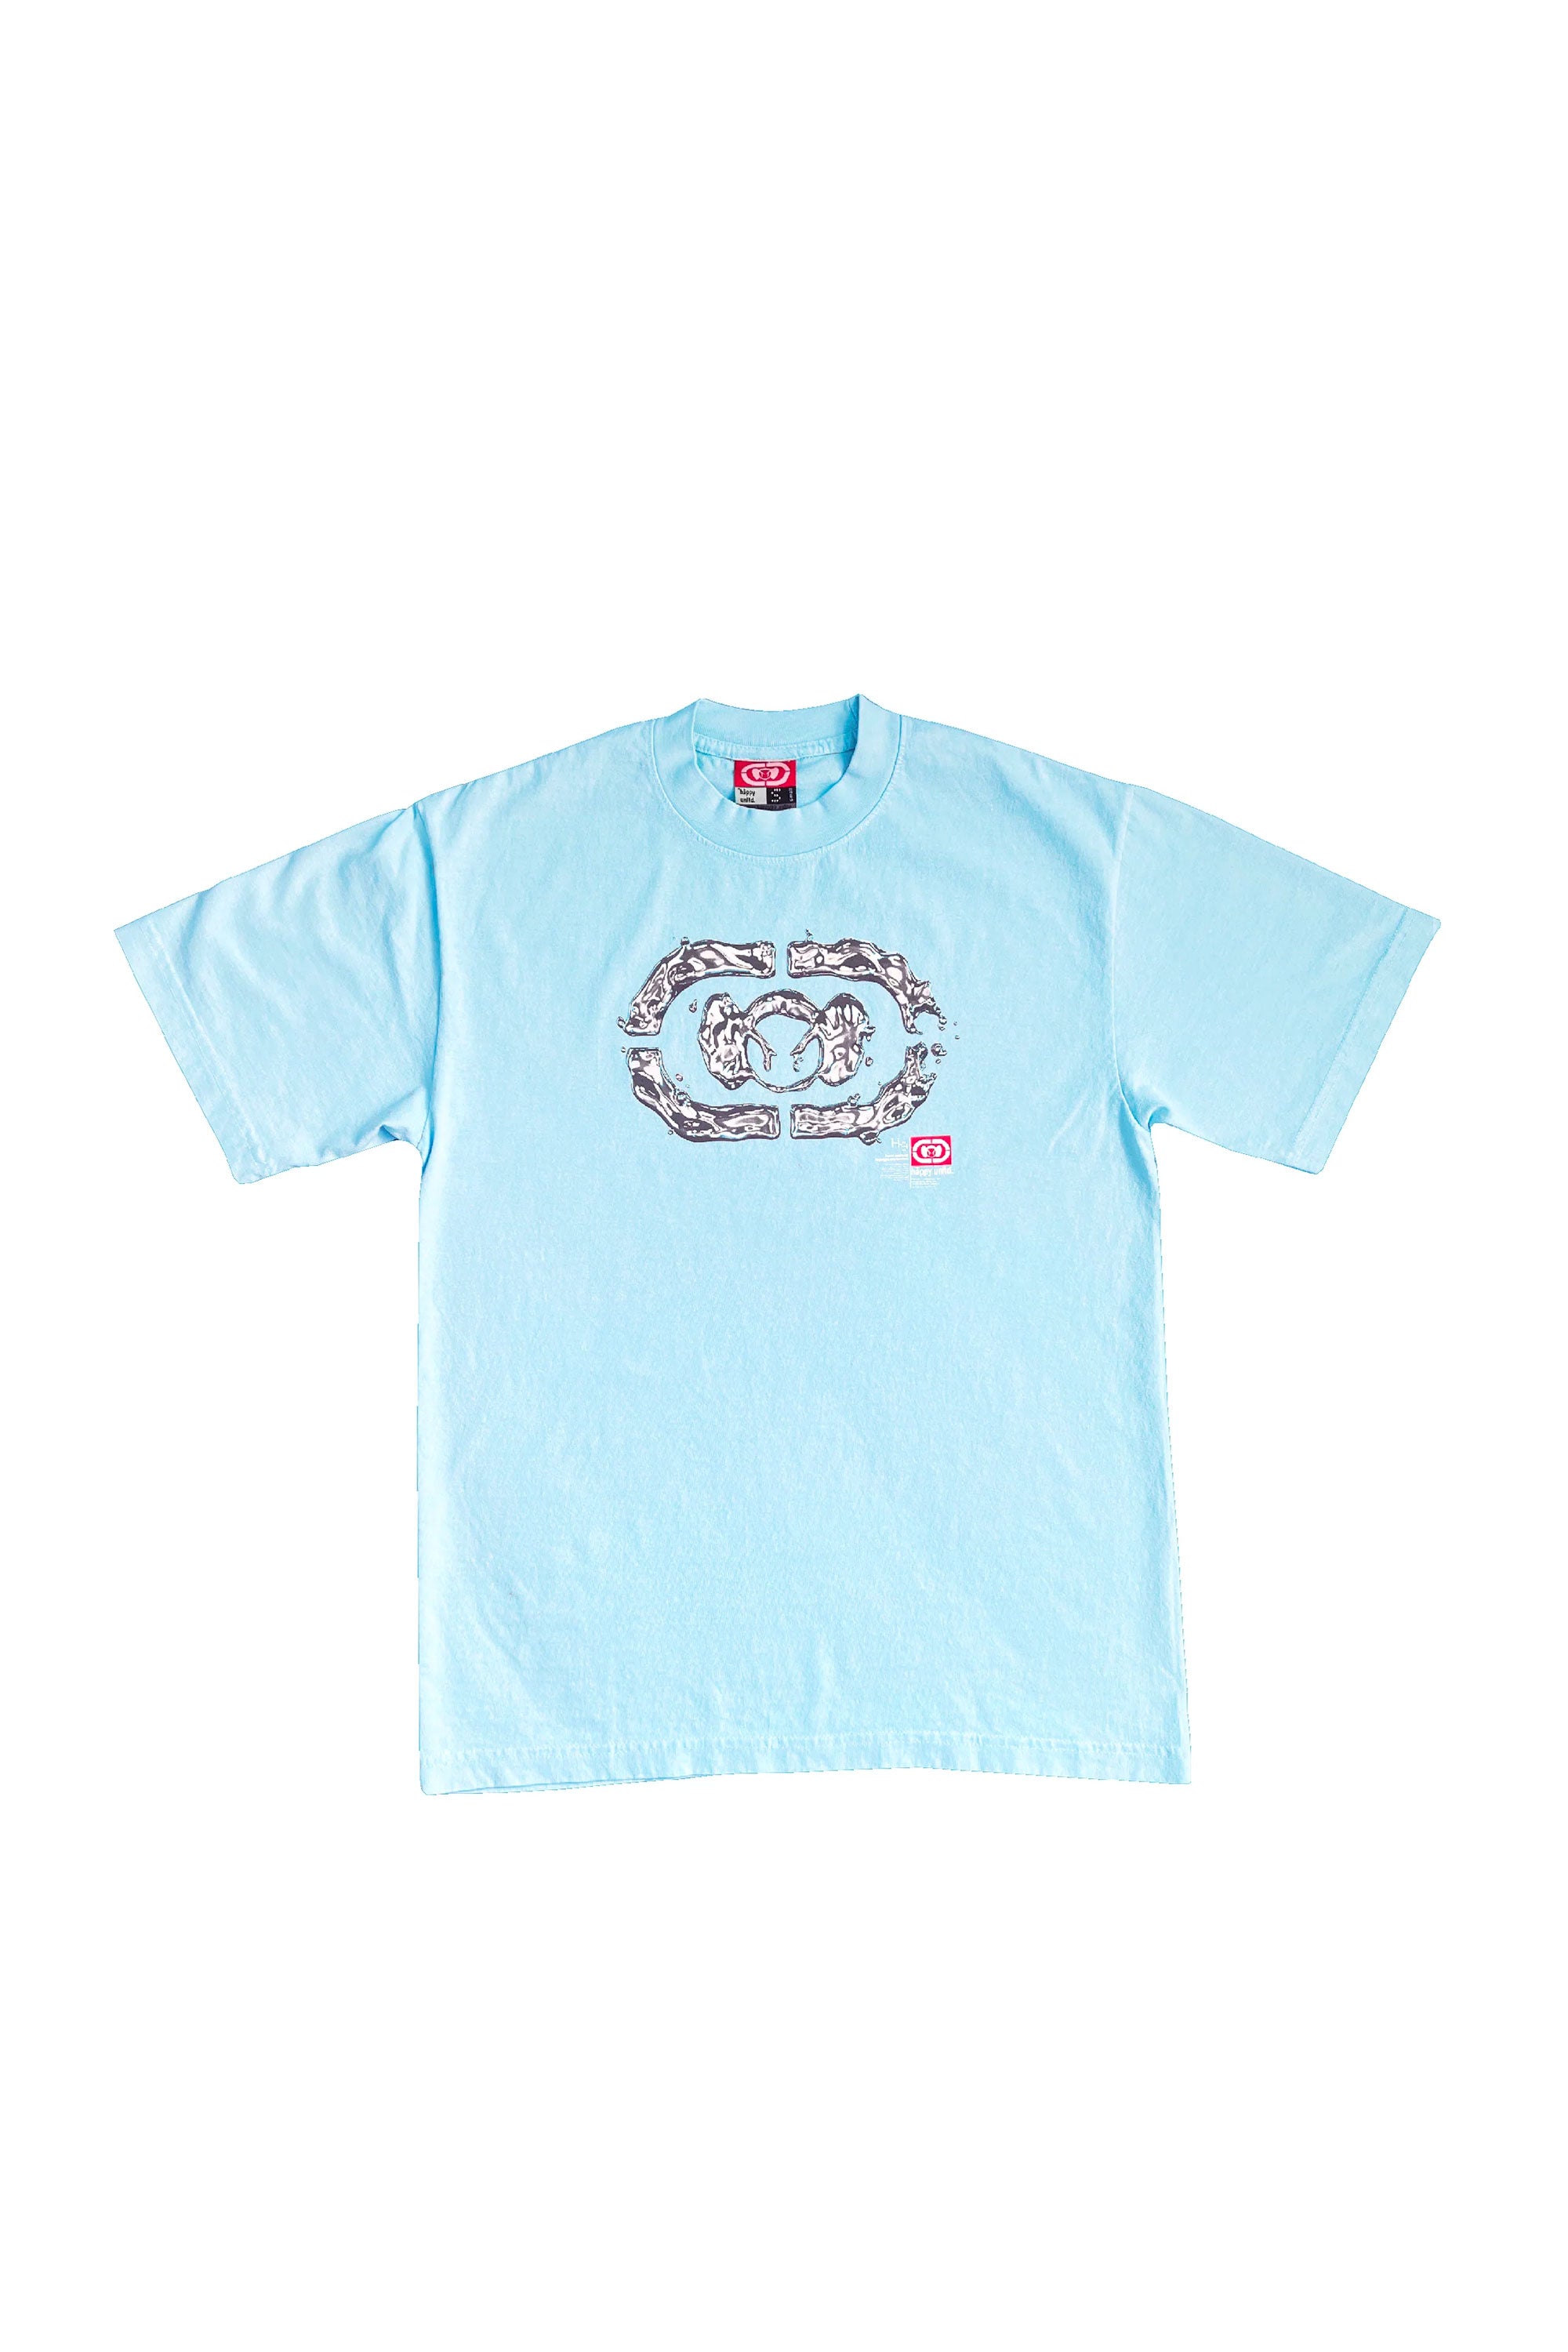 The HAPPY 99 - LIQUID MERCURY TEE BABY BLUE available online with global shipping, and in PAM Stores Melbourne and Sydney.